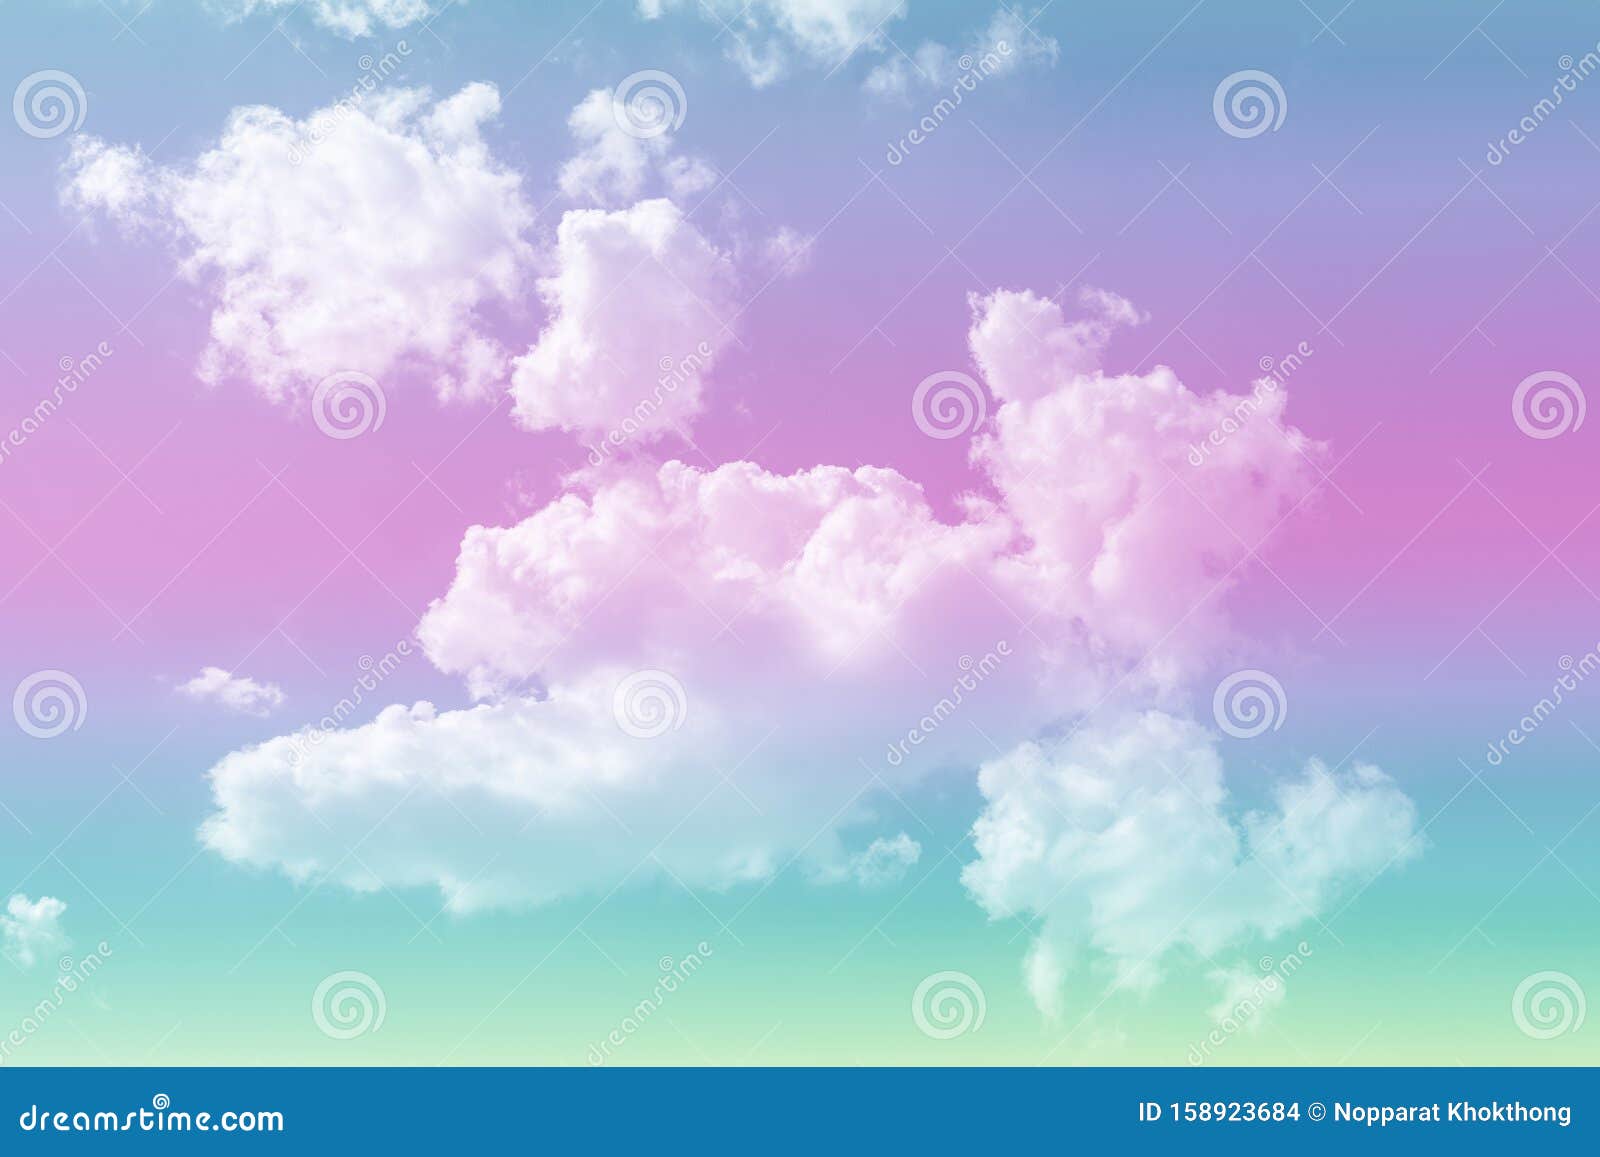 Sun and Clouds Background with a Soft Pastel Color. Fantasy Magical Sunny  Sky Pastel Background with Colorful Cloudy Sky Stock Photo - Image of  beauty, heaven: 158923684